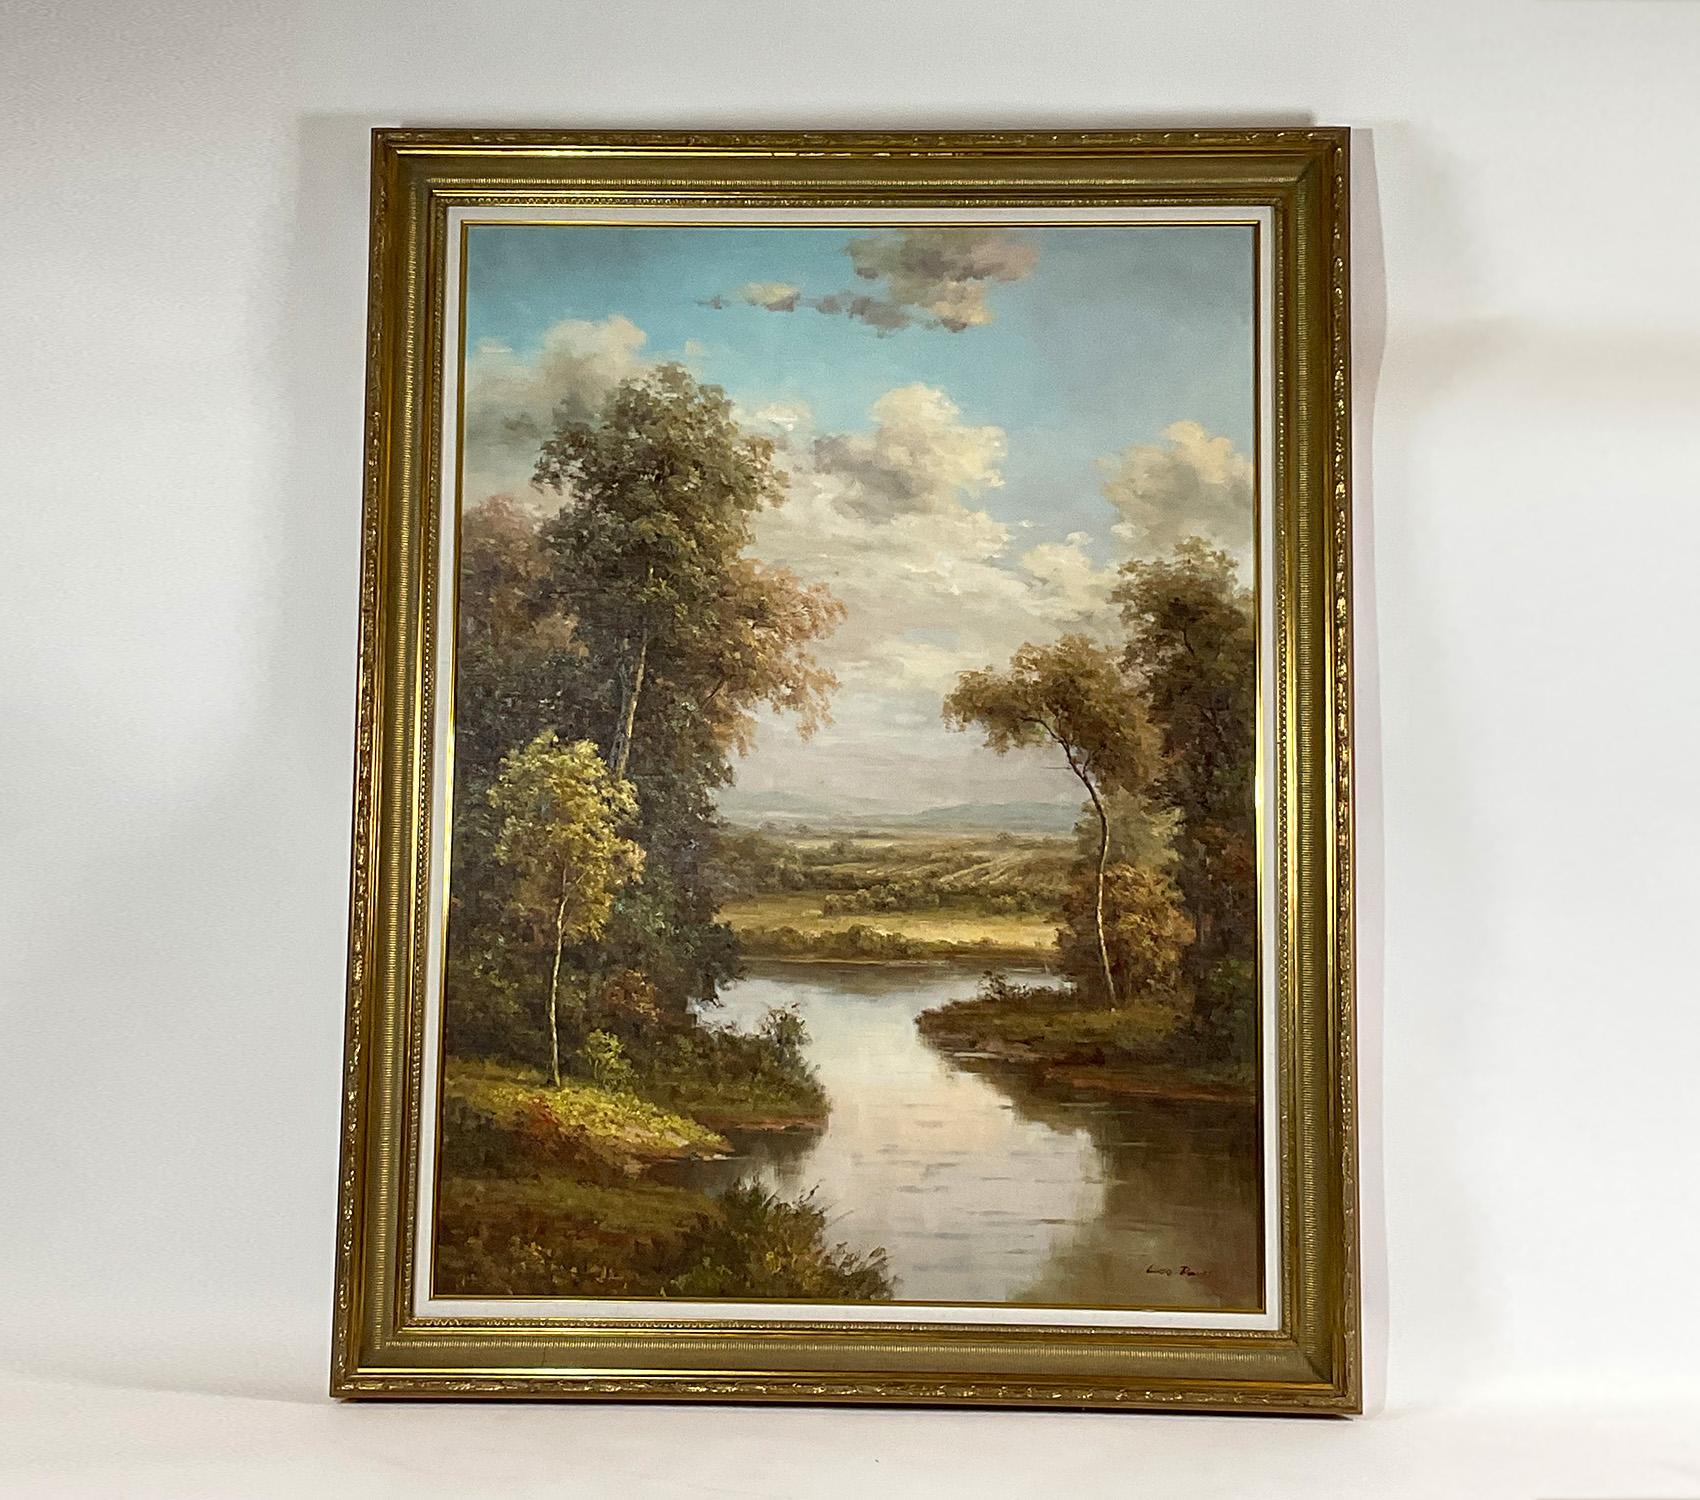 Exceptionally large oil on canvas landscape painting showing a creek or river. Twentieth century. Not rare just decorative. Signed Leo Davis.